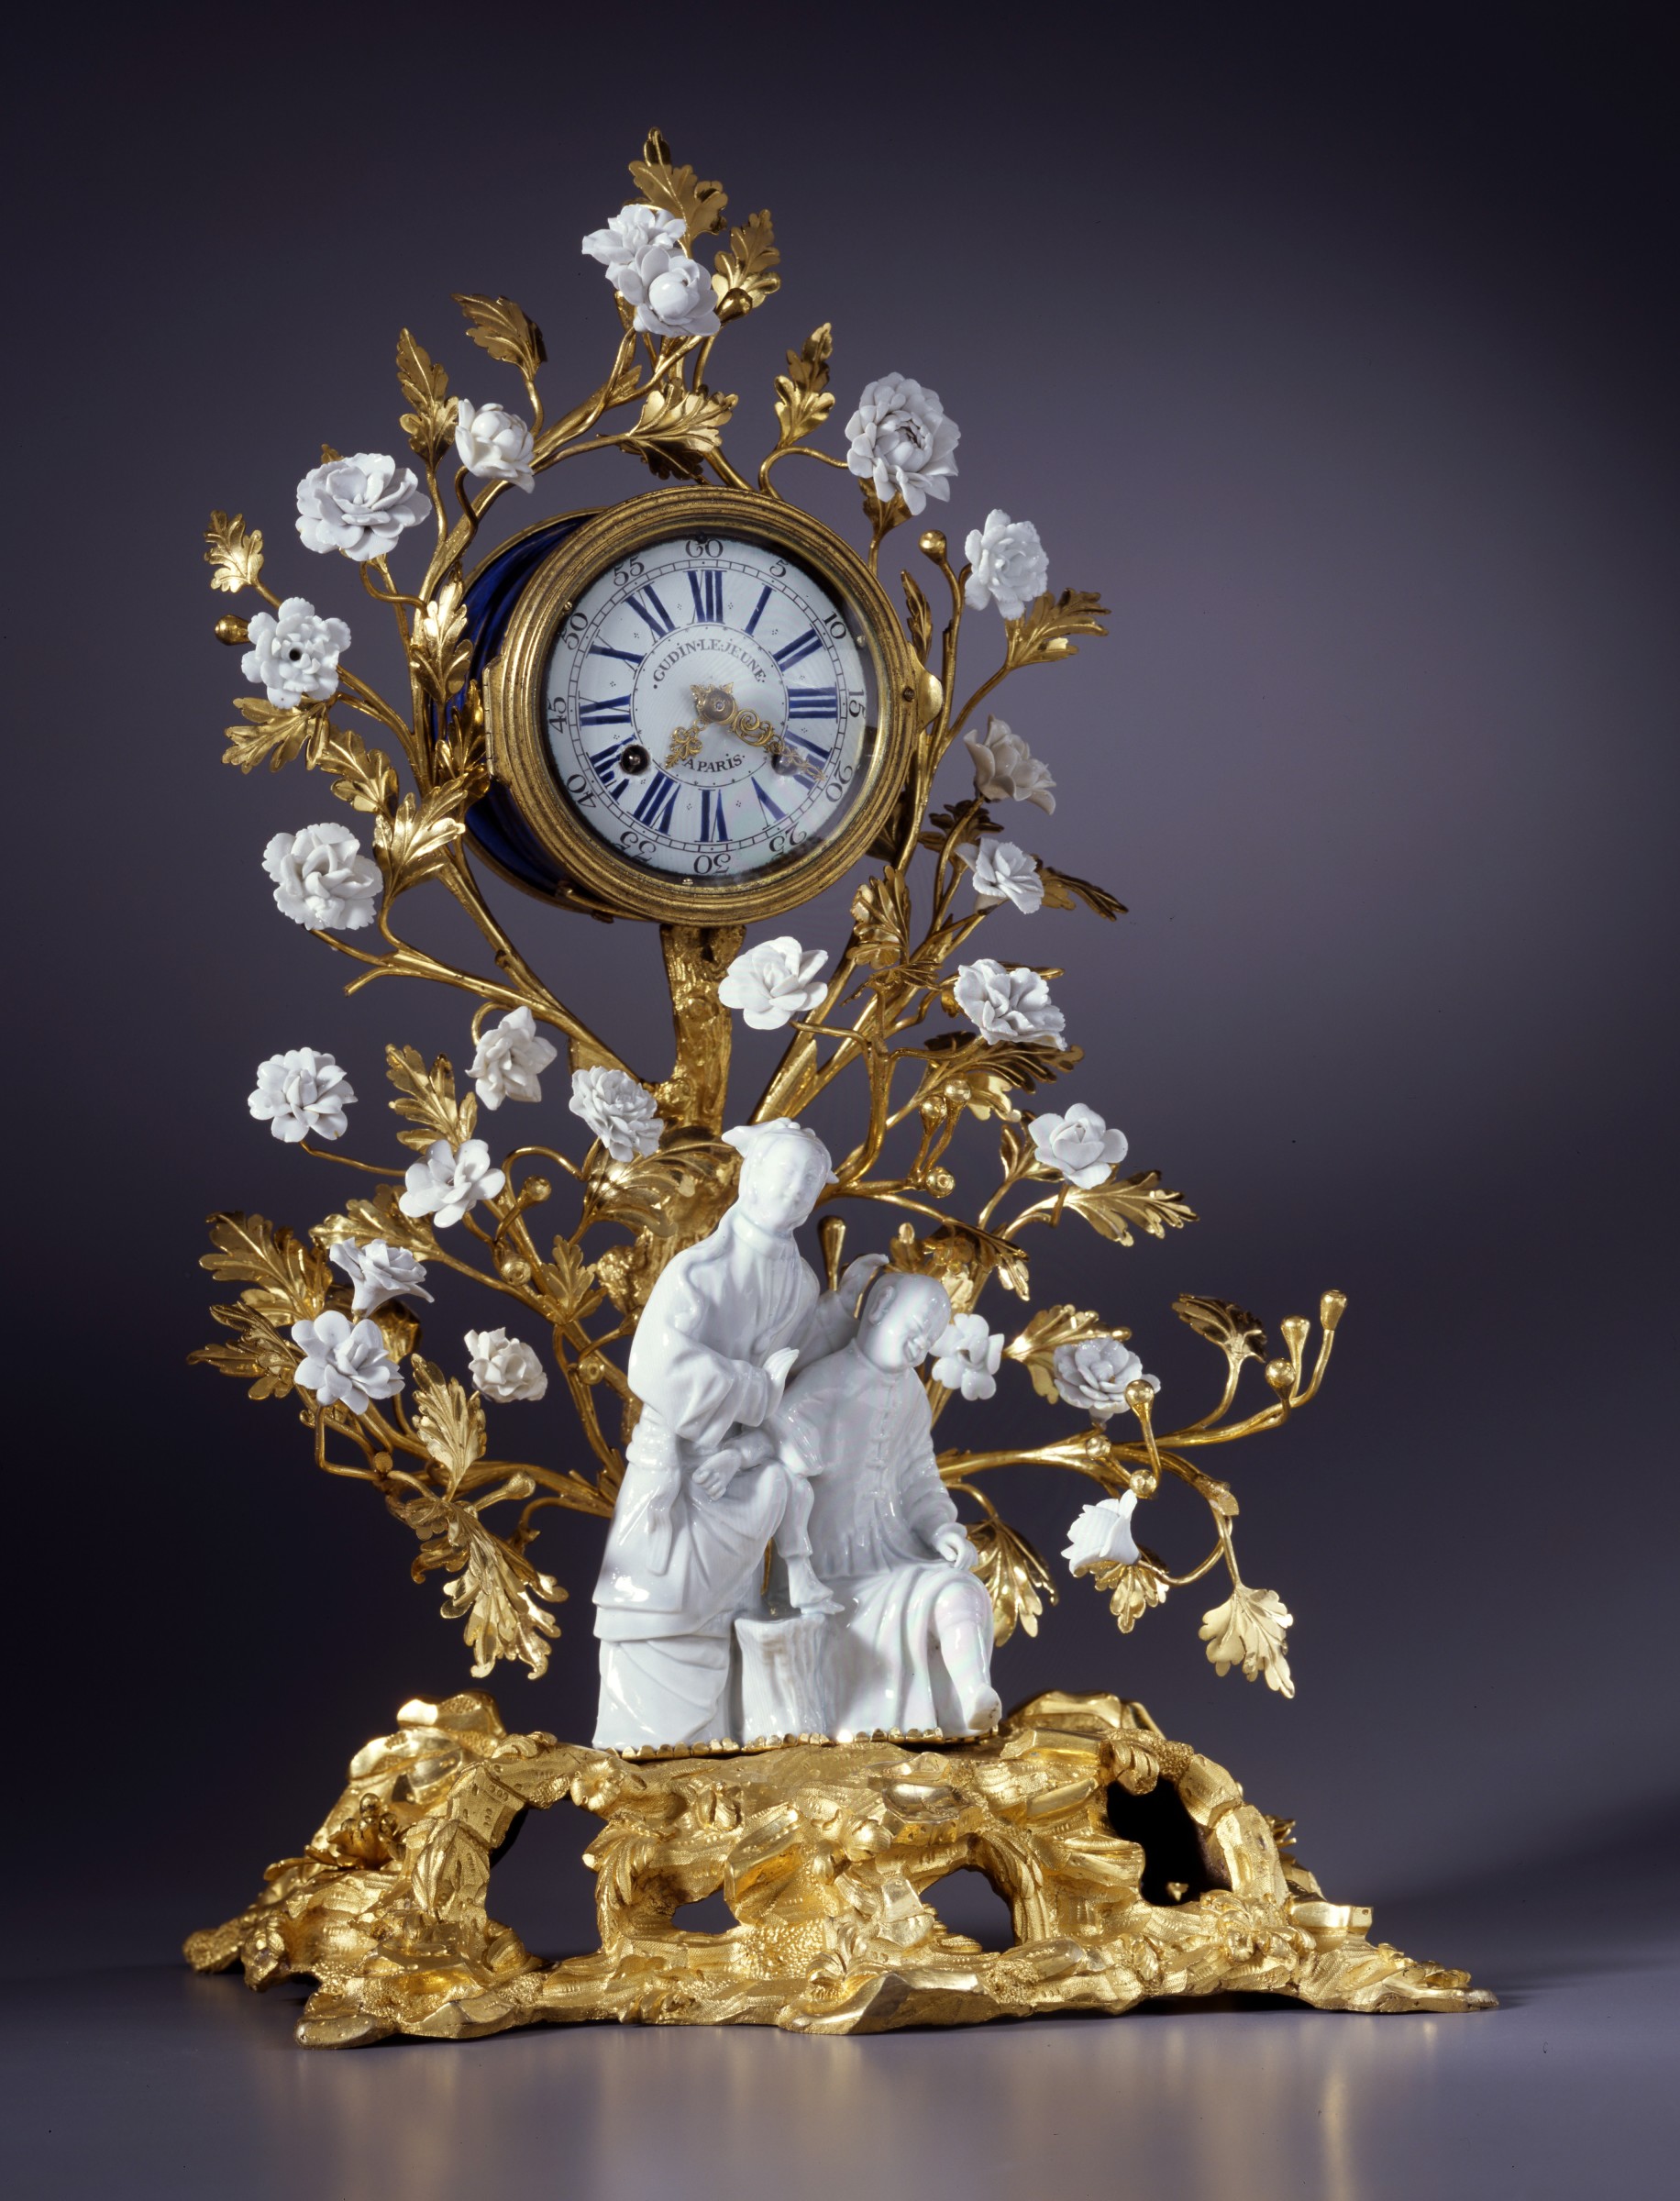 Gudin Le Jeune A Louis Xv Mantel Clock Of Eight Day Duration By